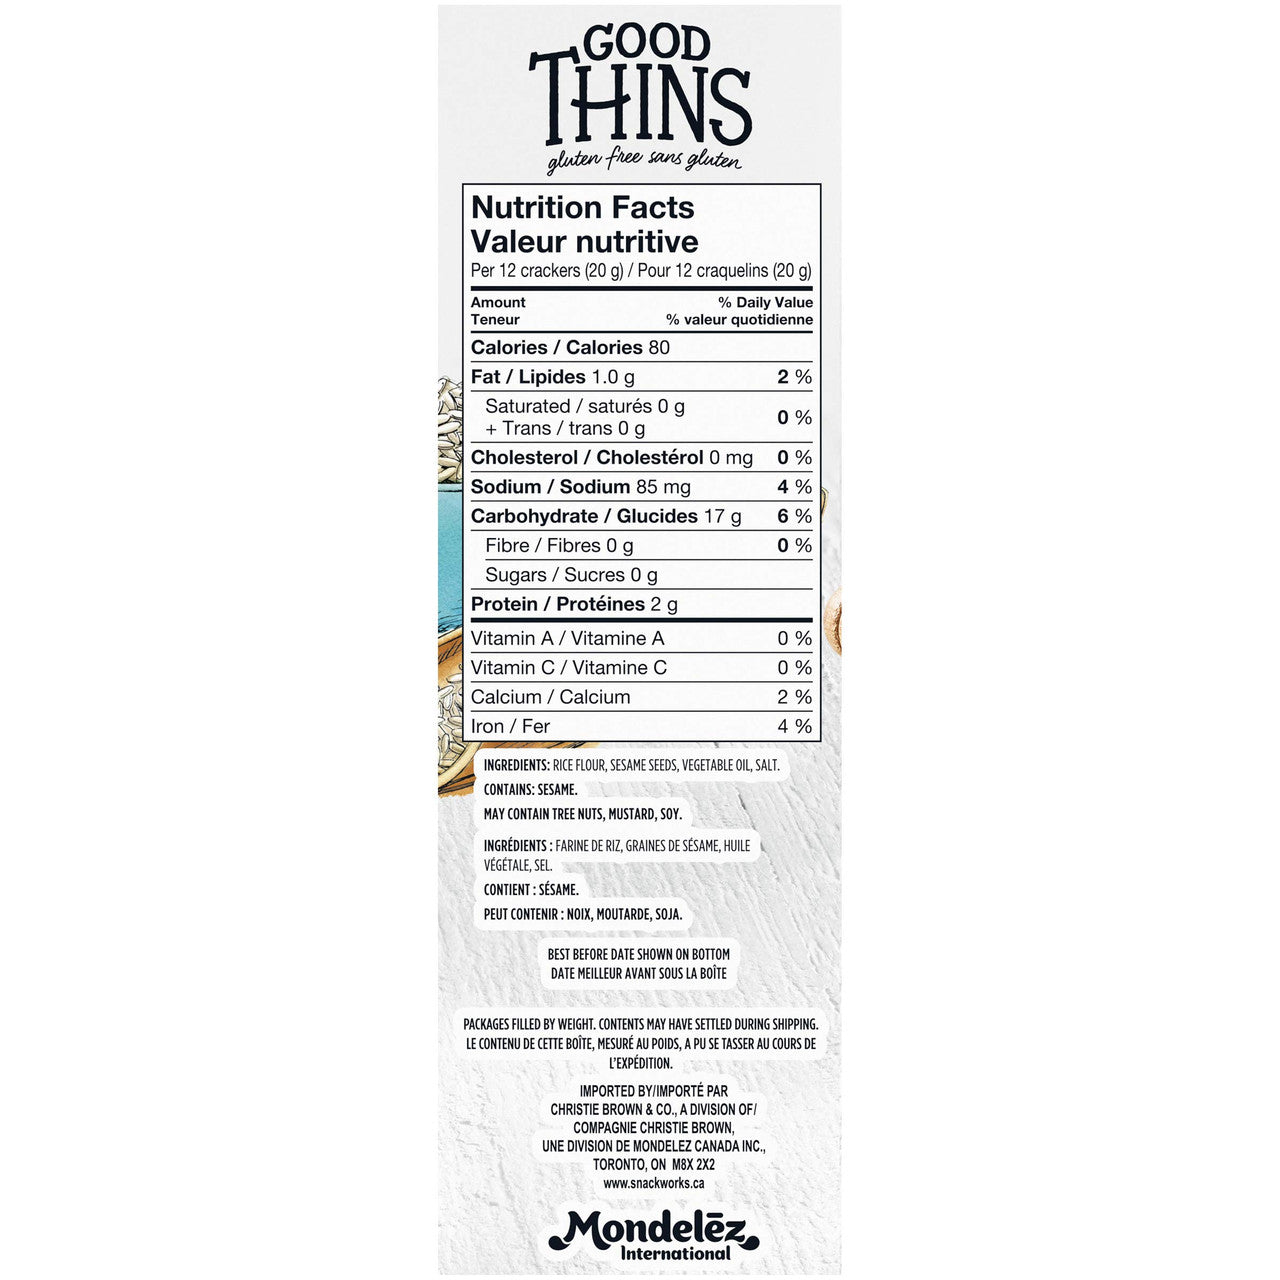 Good Thins Rice Sesame Crackers, 100g/3.5oz, Box, (Imported from Canada)